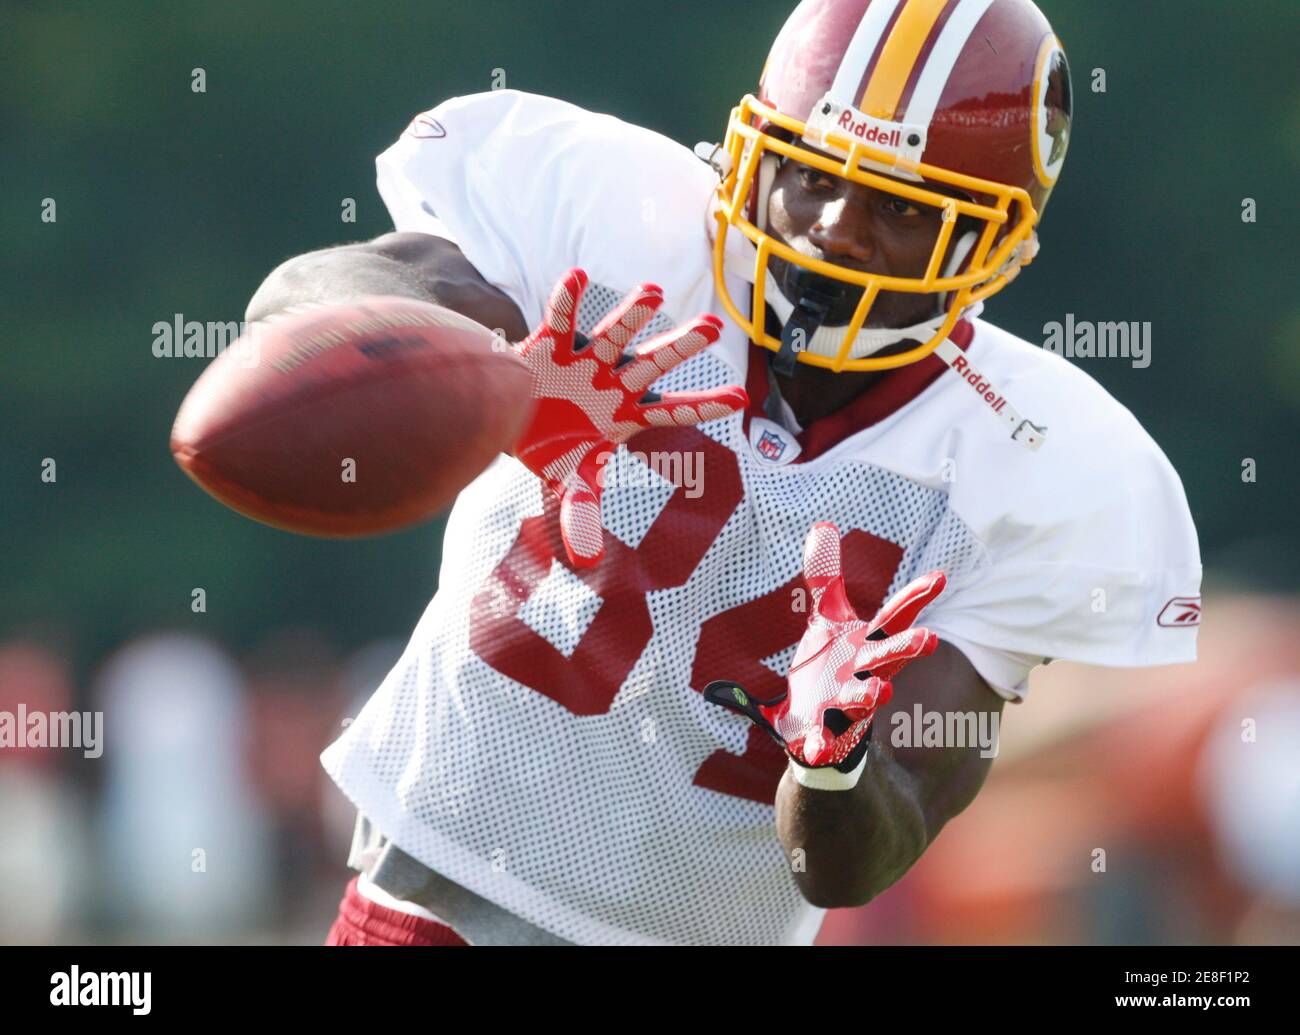 Washington Redskins wide receiver Joey Galloway catches a pass during drills at the third day of their NFL football training camp in Ashburn, Virginia July 31, 2010.   REUTERS/Gary Cameron (UNITED STATES - Tags: SPORT FOOTBALL) Stock Photo